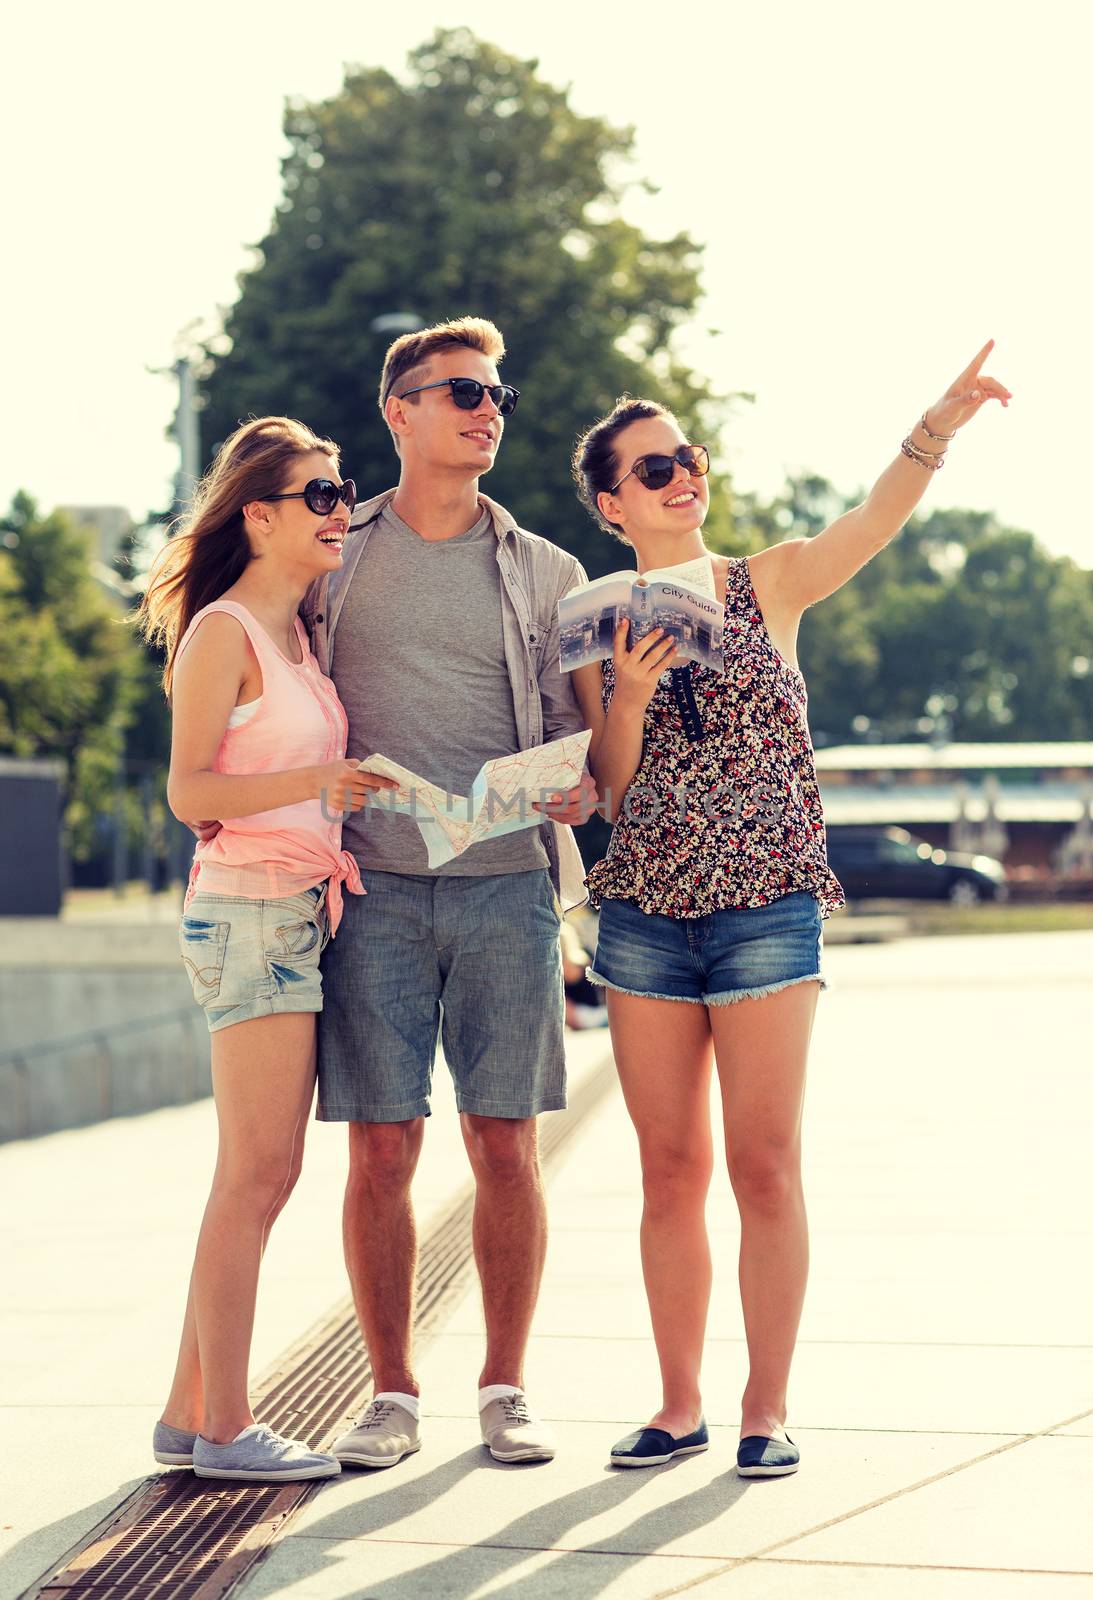 friendship, travel, tourism, vacation, summer and people concept - smiling friends with map and city guide pointing finger outdoors